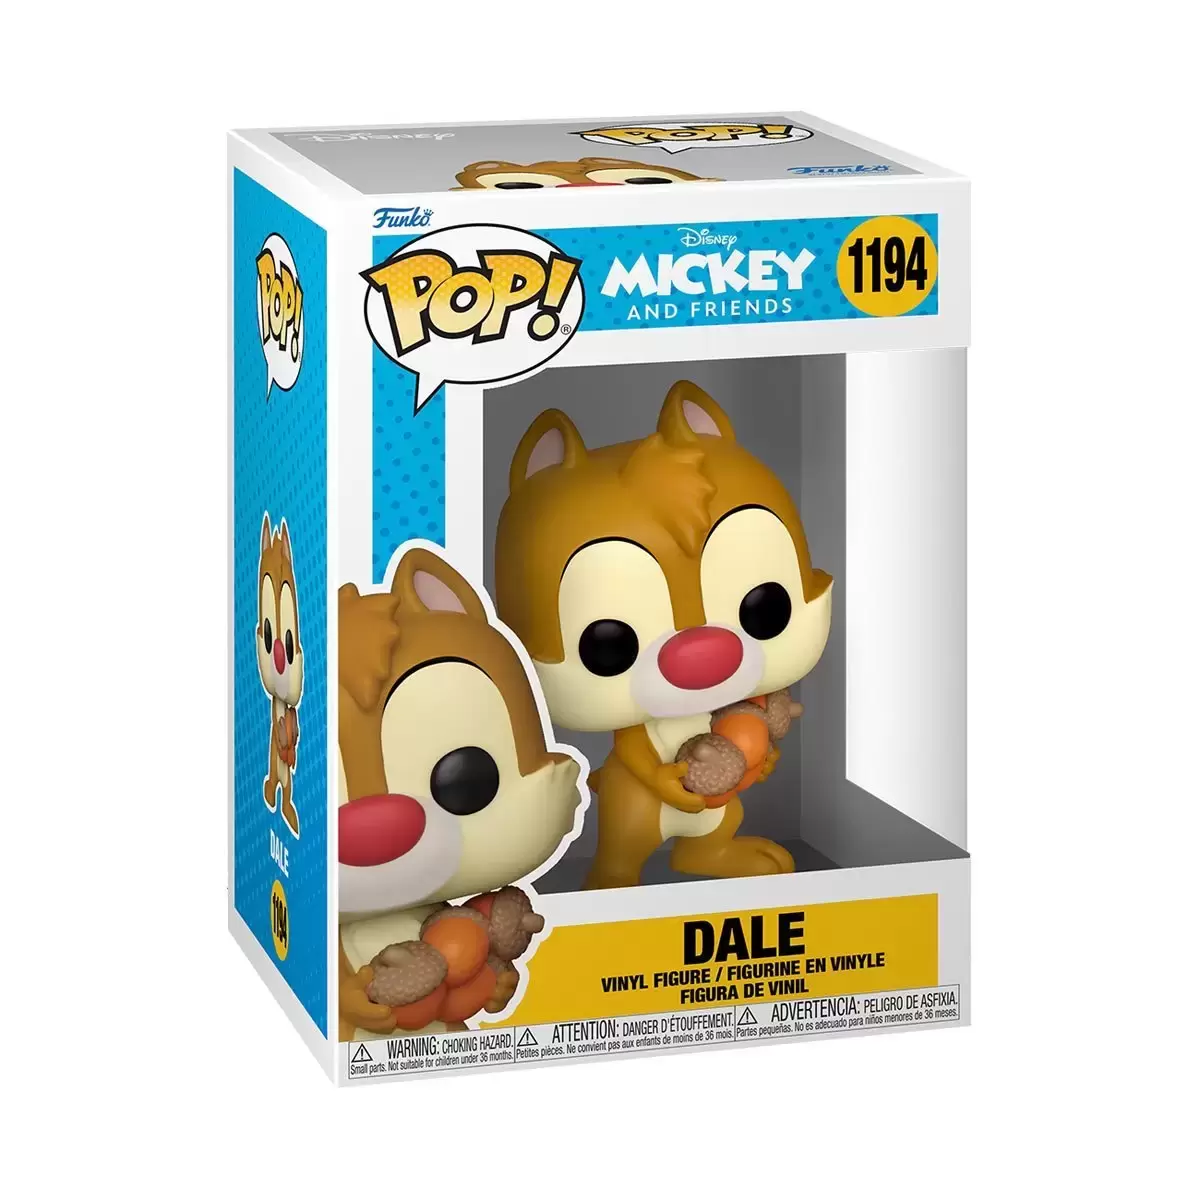 POP! Disney - Mickey and Friends - Dale